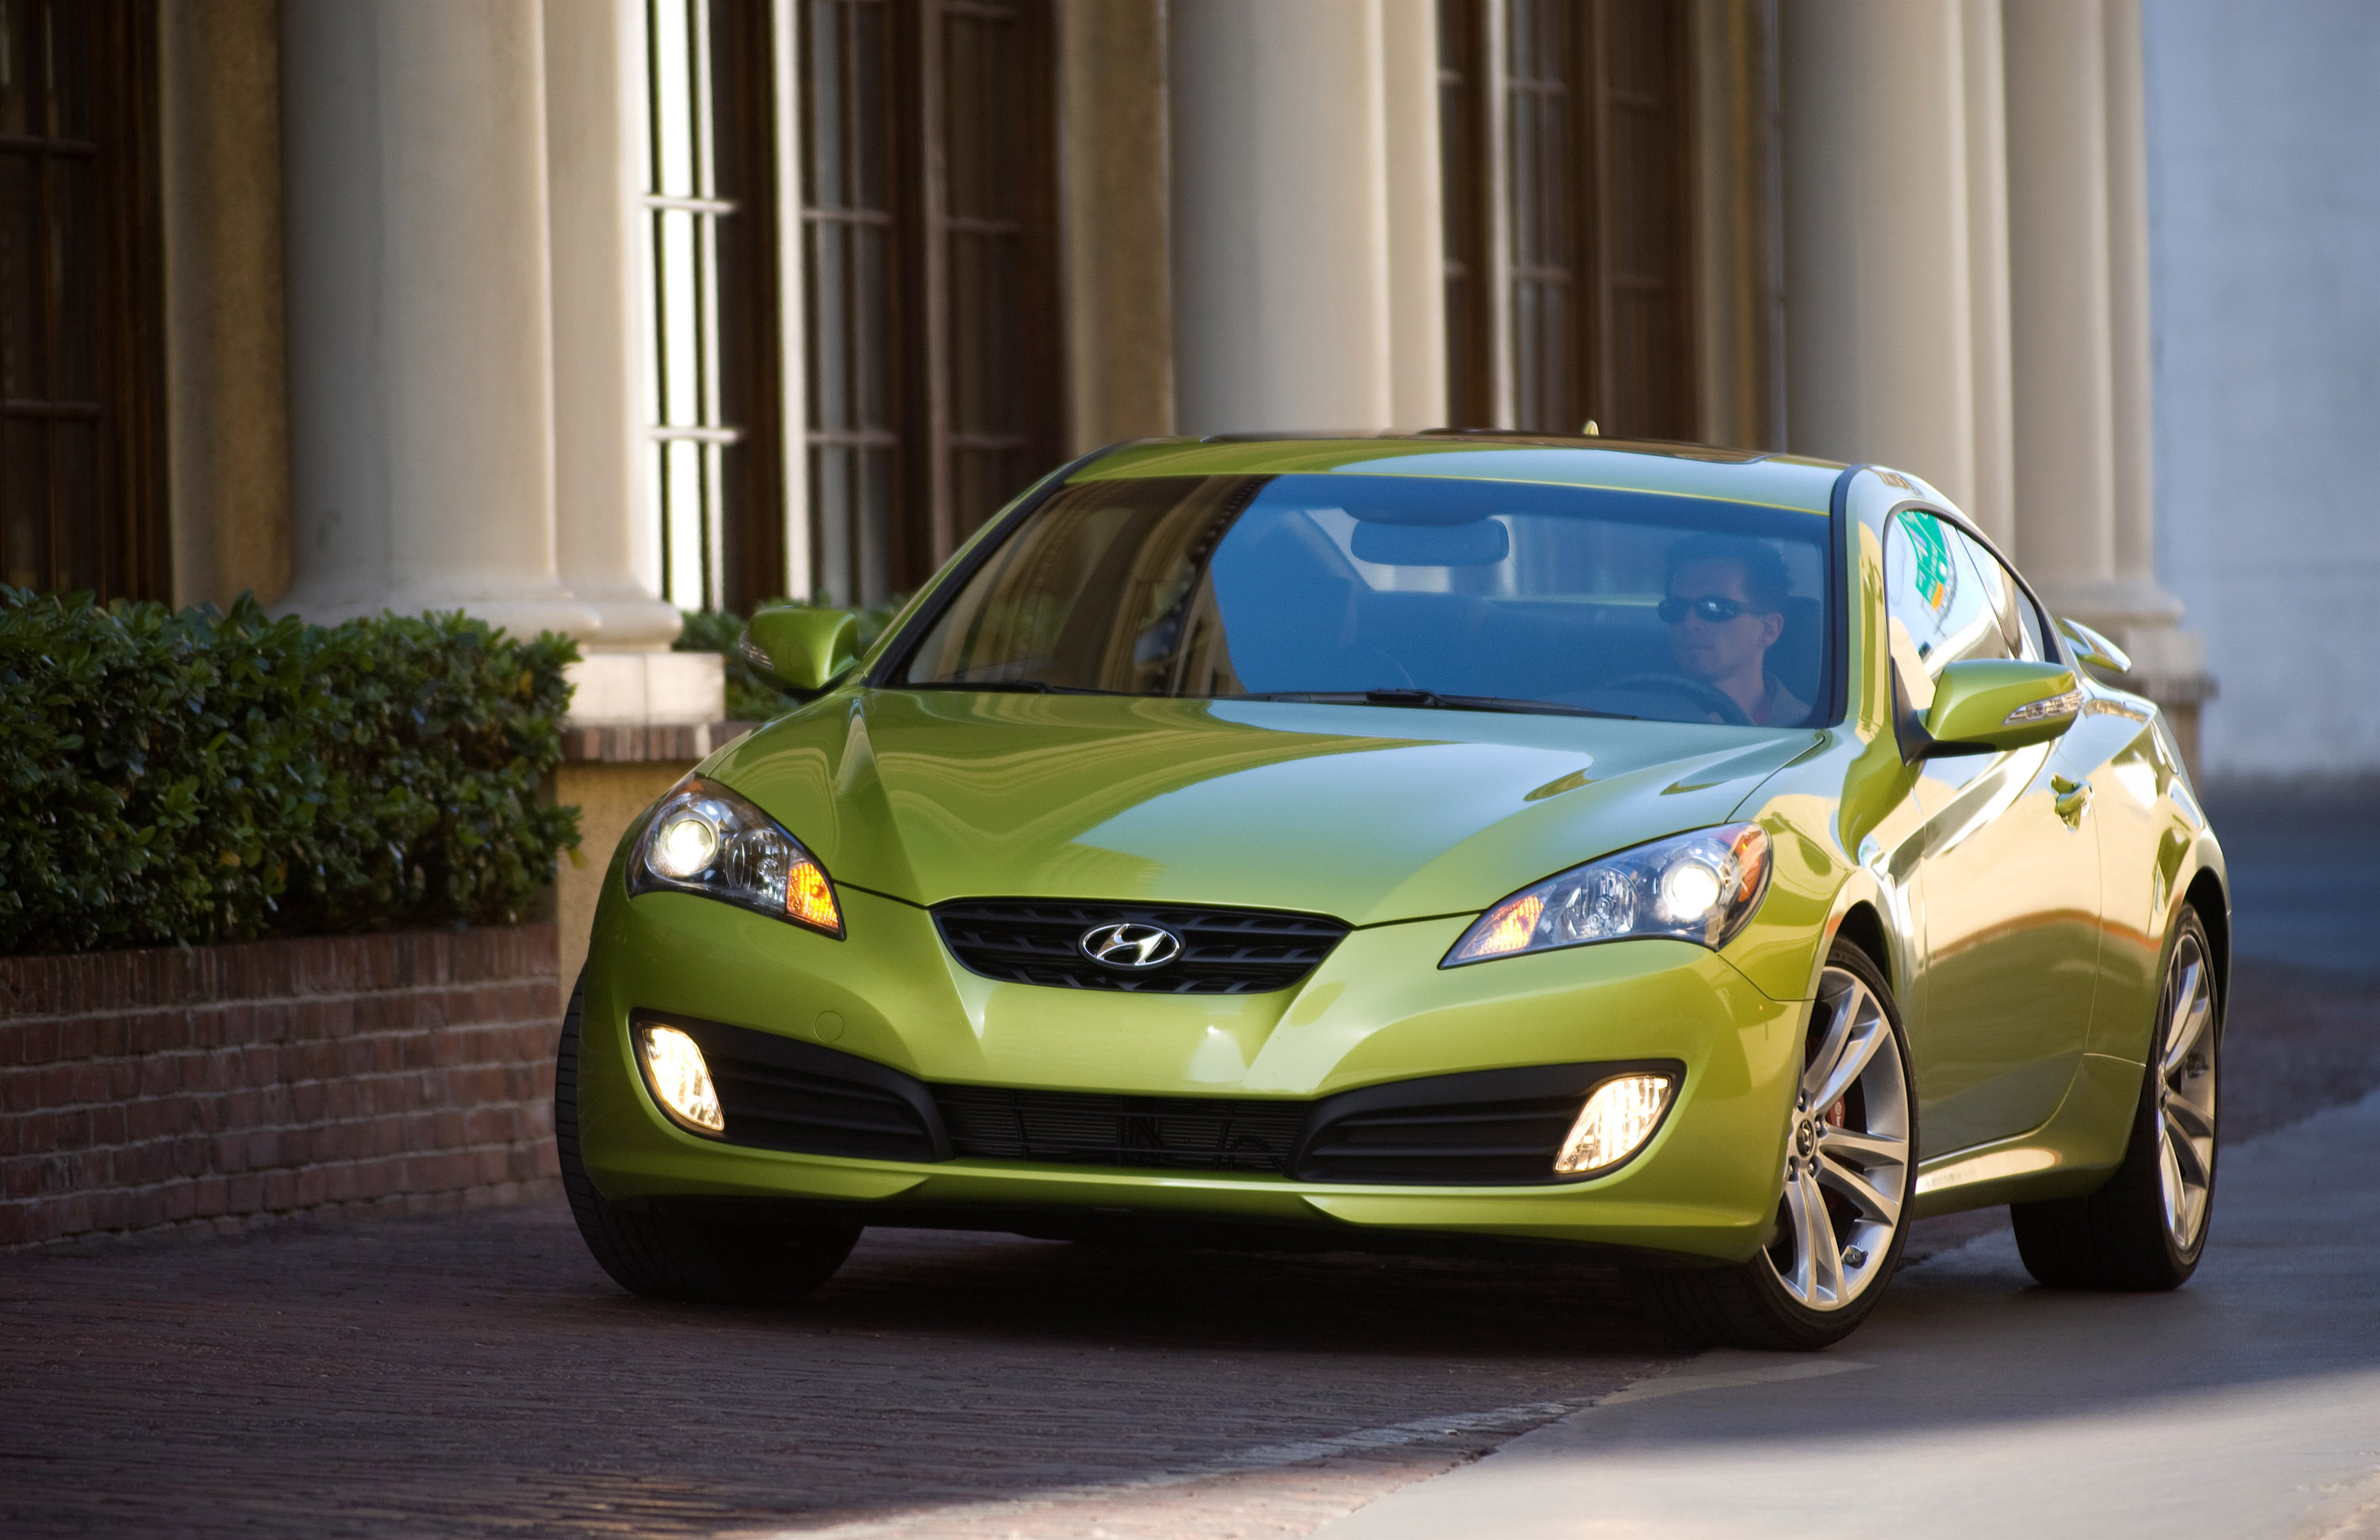 2010 Hyundai Genesis Coupe Hd Pictures